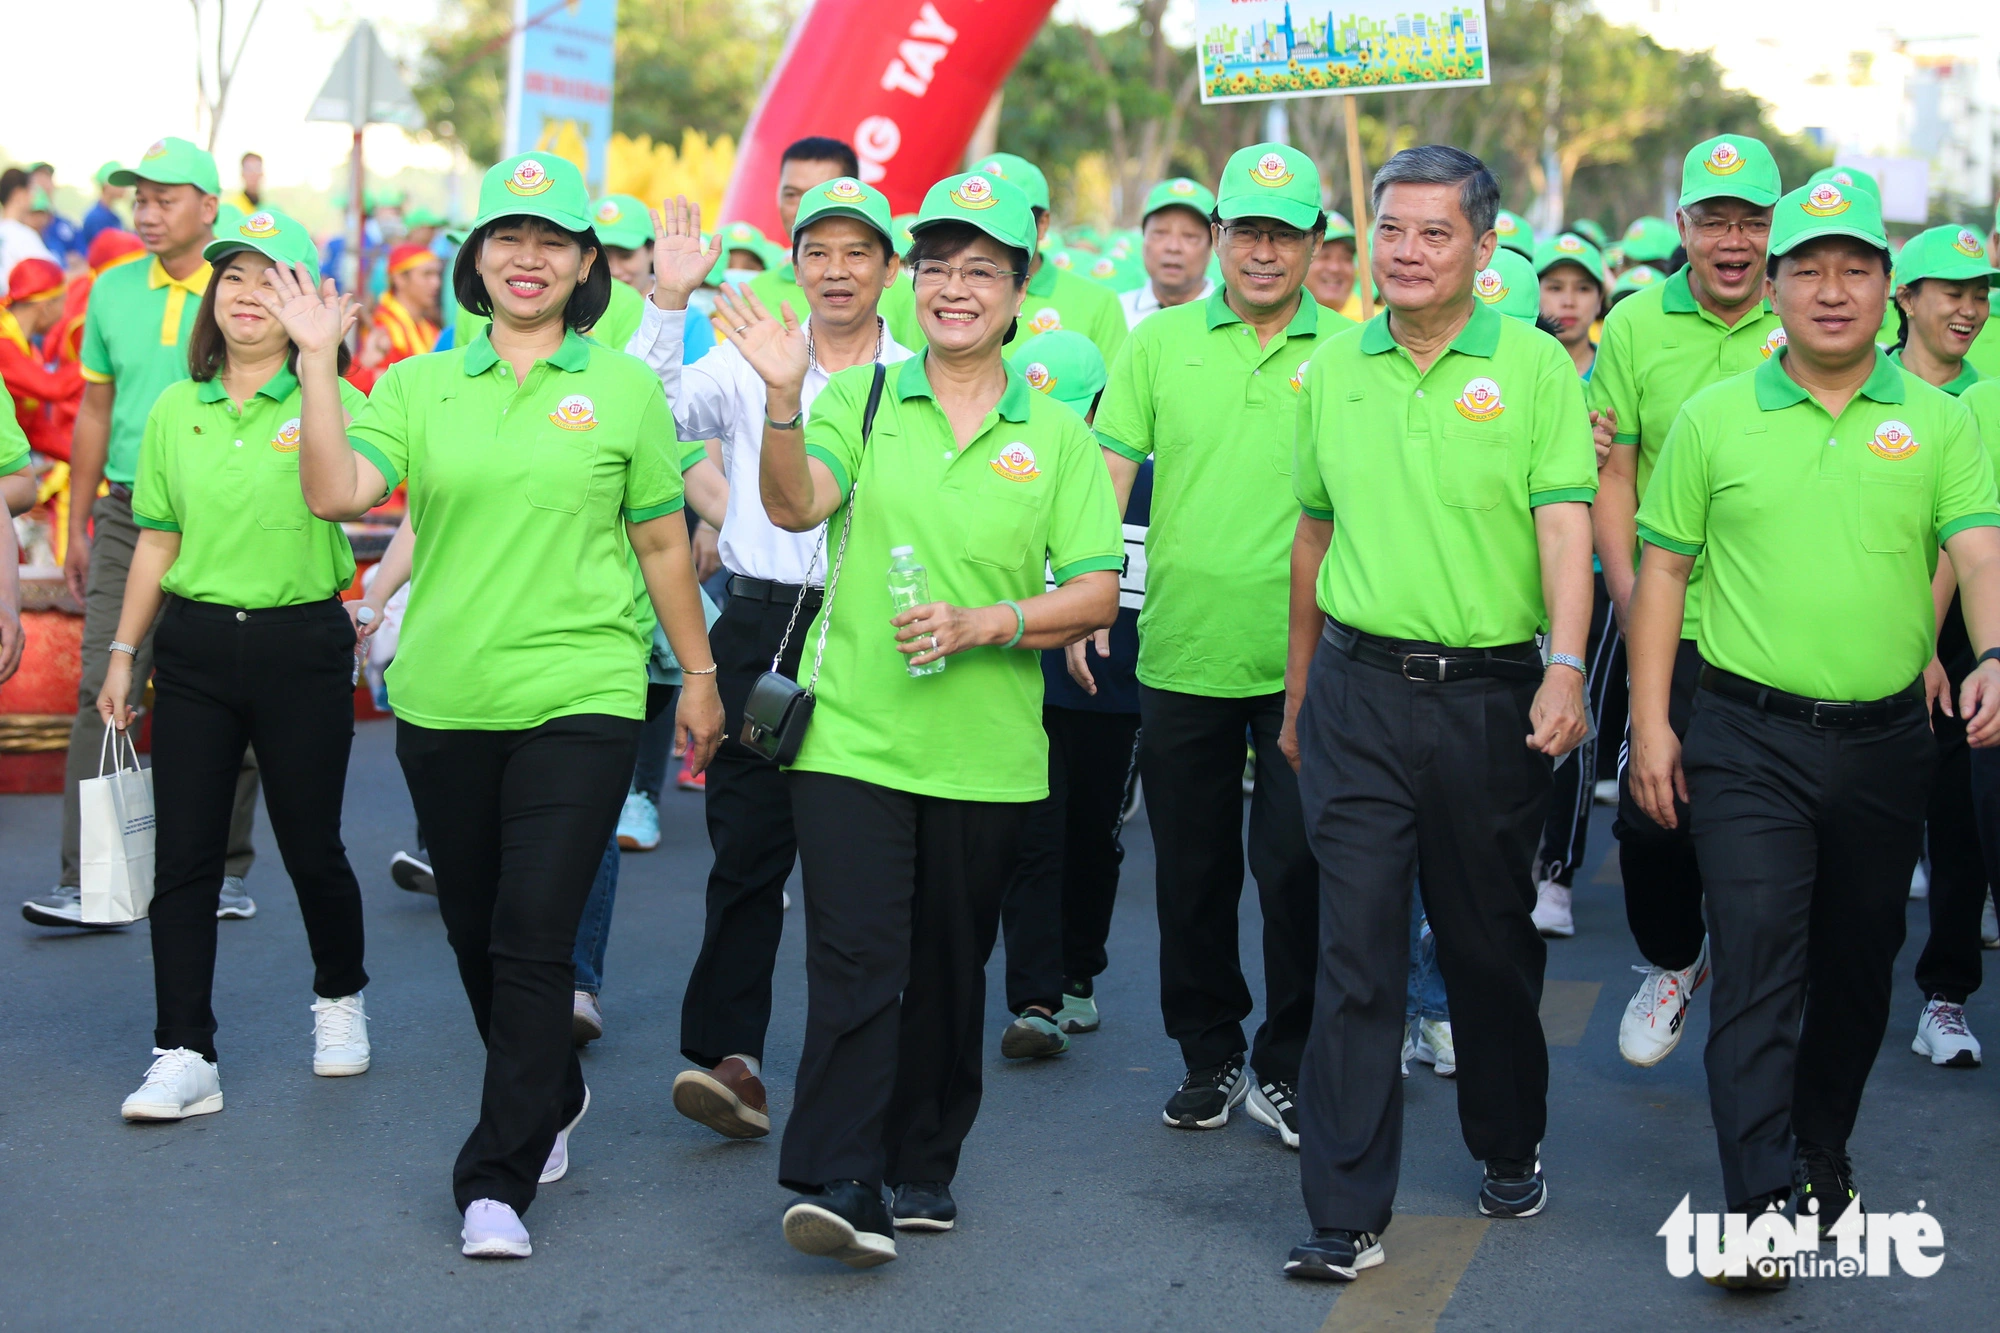 Former and incumbent officials in Ho Chi Minh City join thousands of local people in the walking event